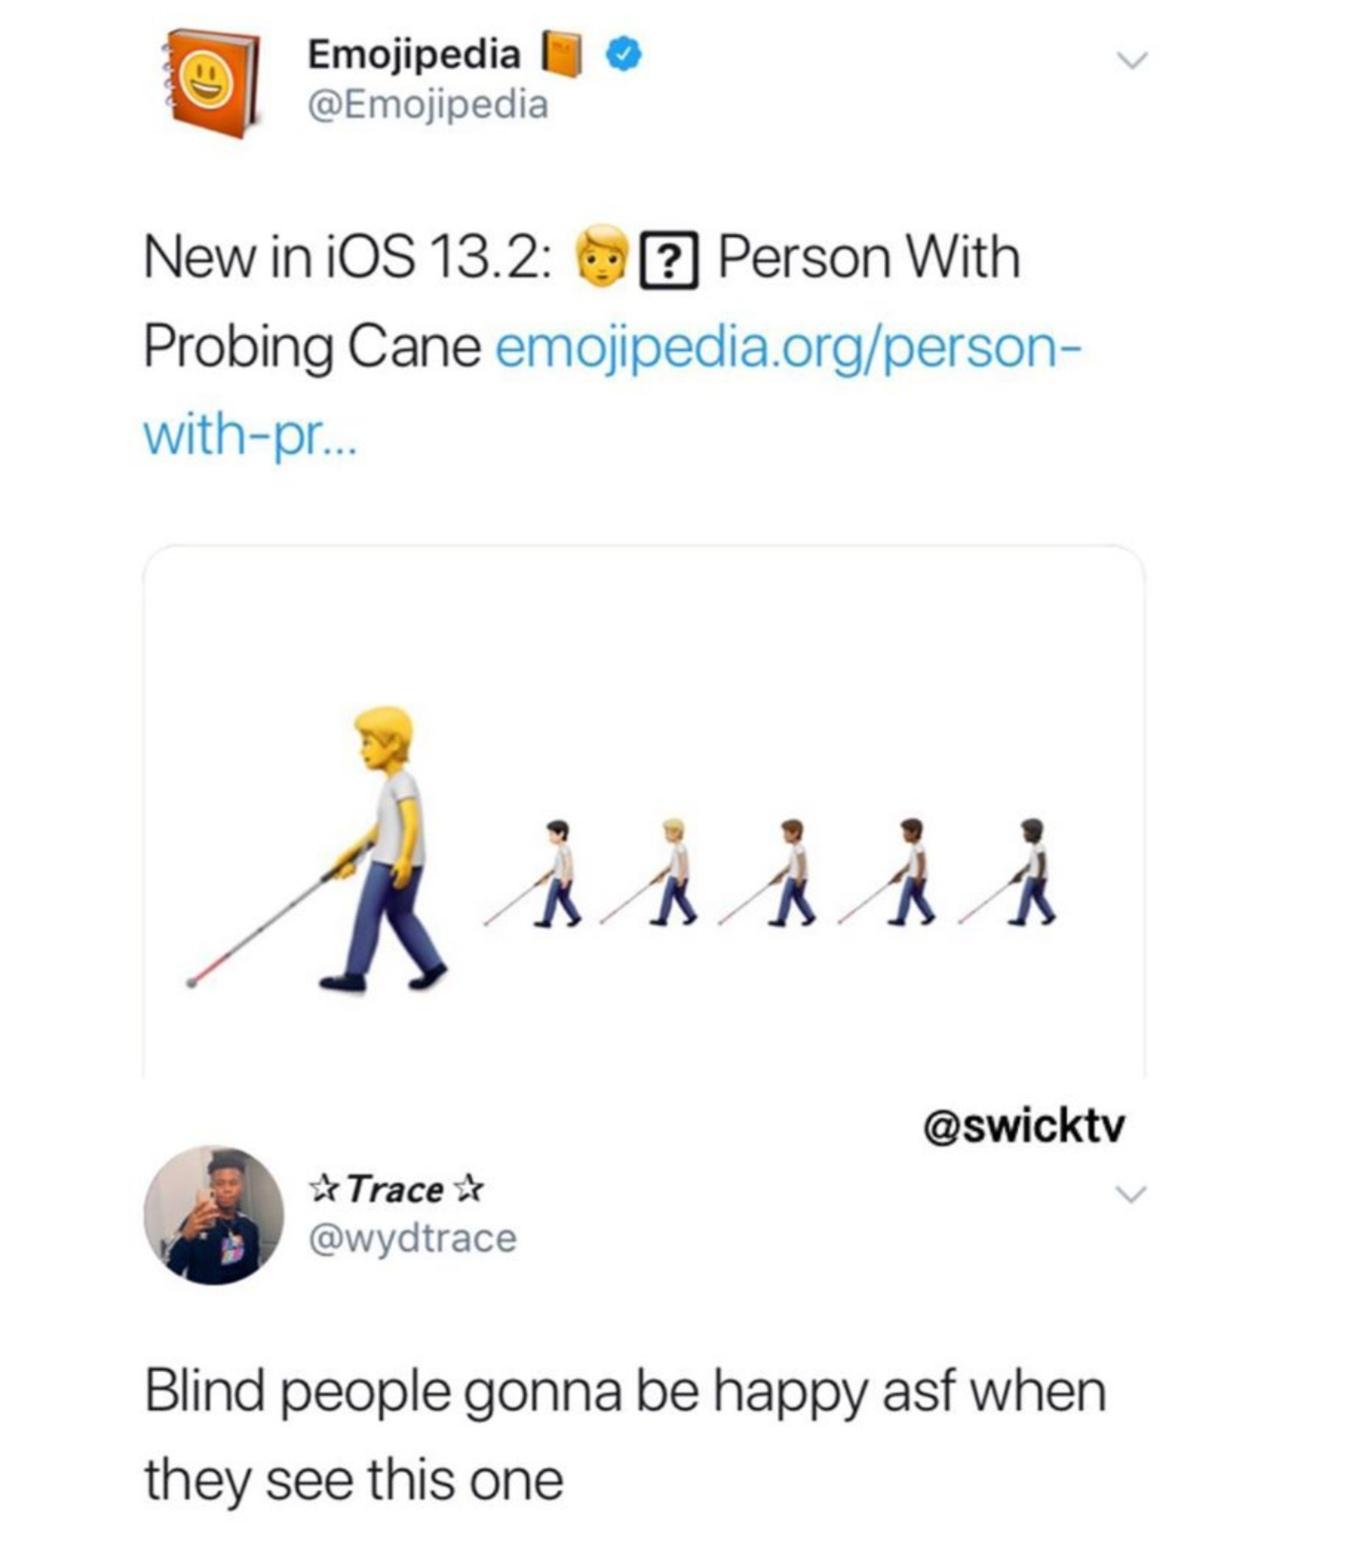 diagram - Emojipedia New in iOS 13.2 Person With Probing Cane emojipedia.orgperson withpr.. Trace Blind people gonna be happy asf when they see this one